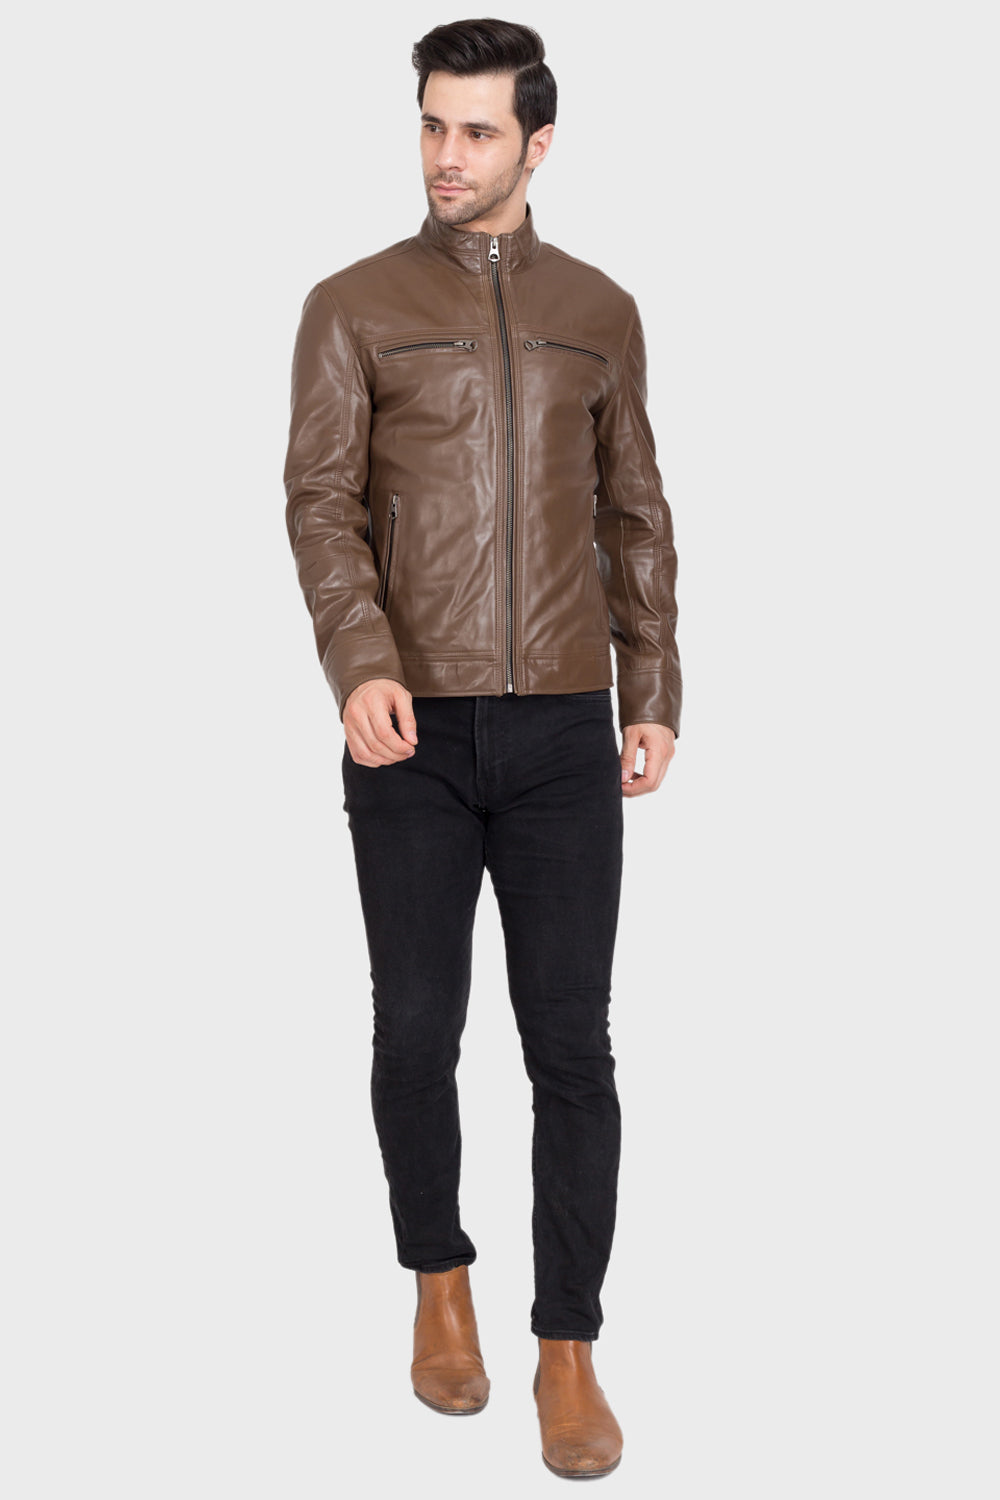 Justanned Russet Zip Leather Jacket